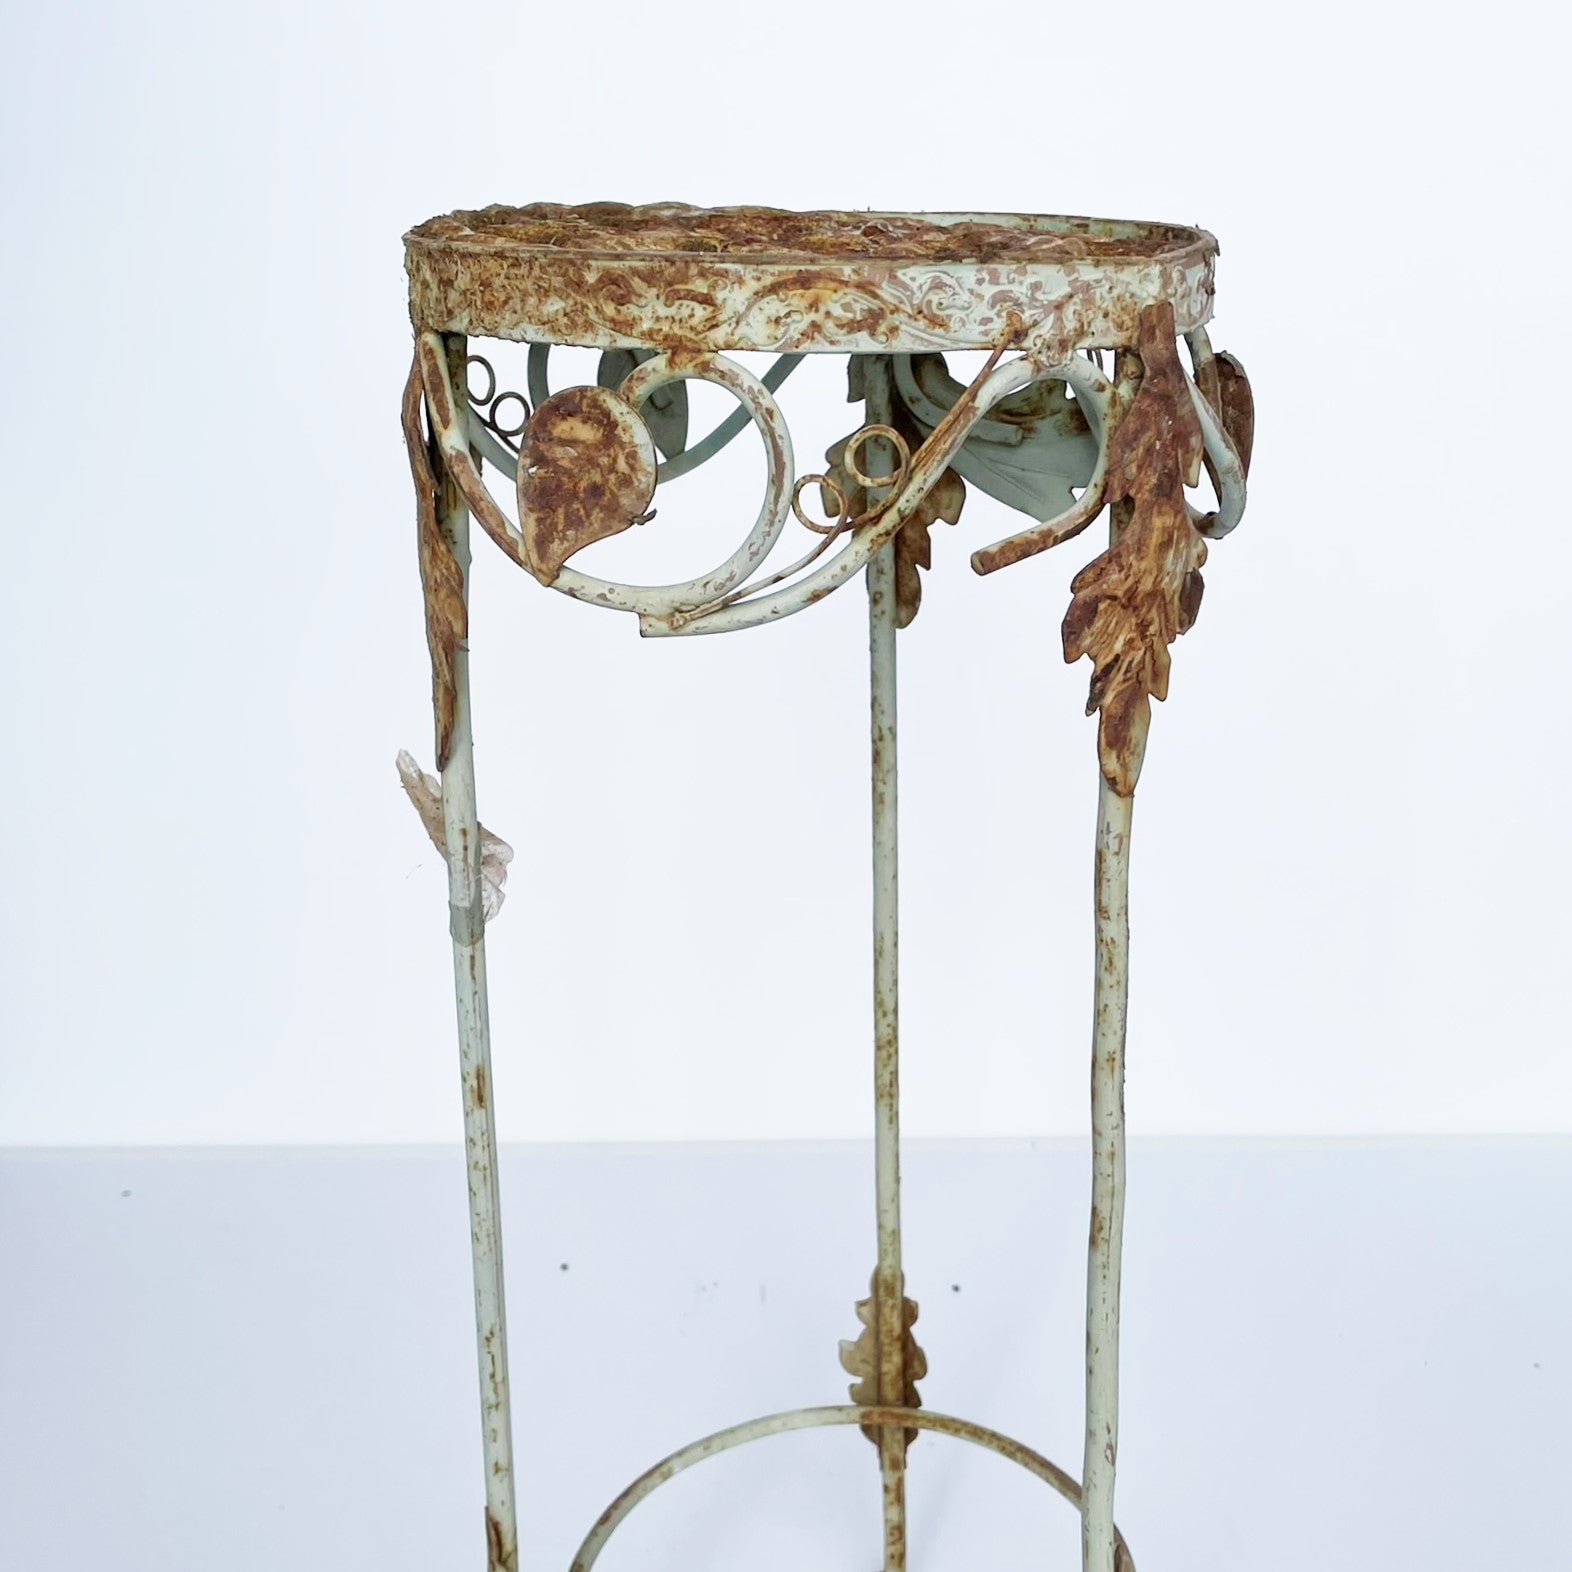 Weathered Ornate Metal Plant Stand